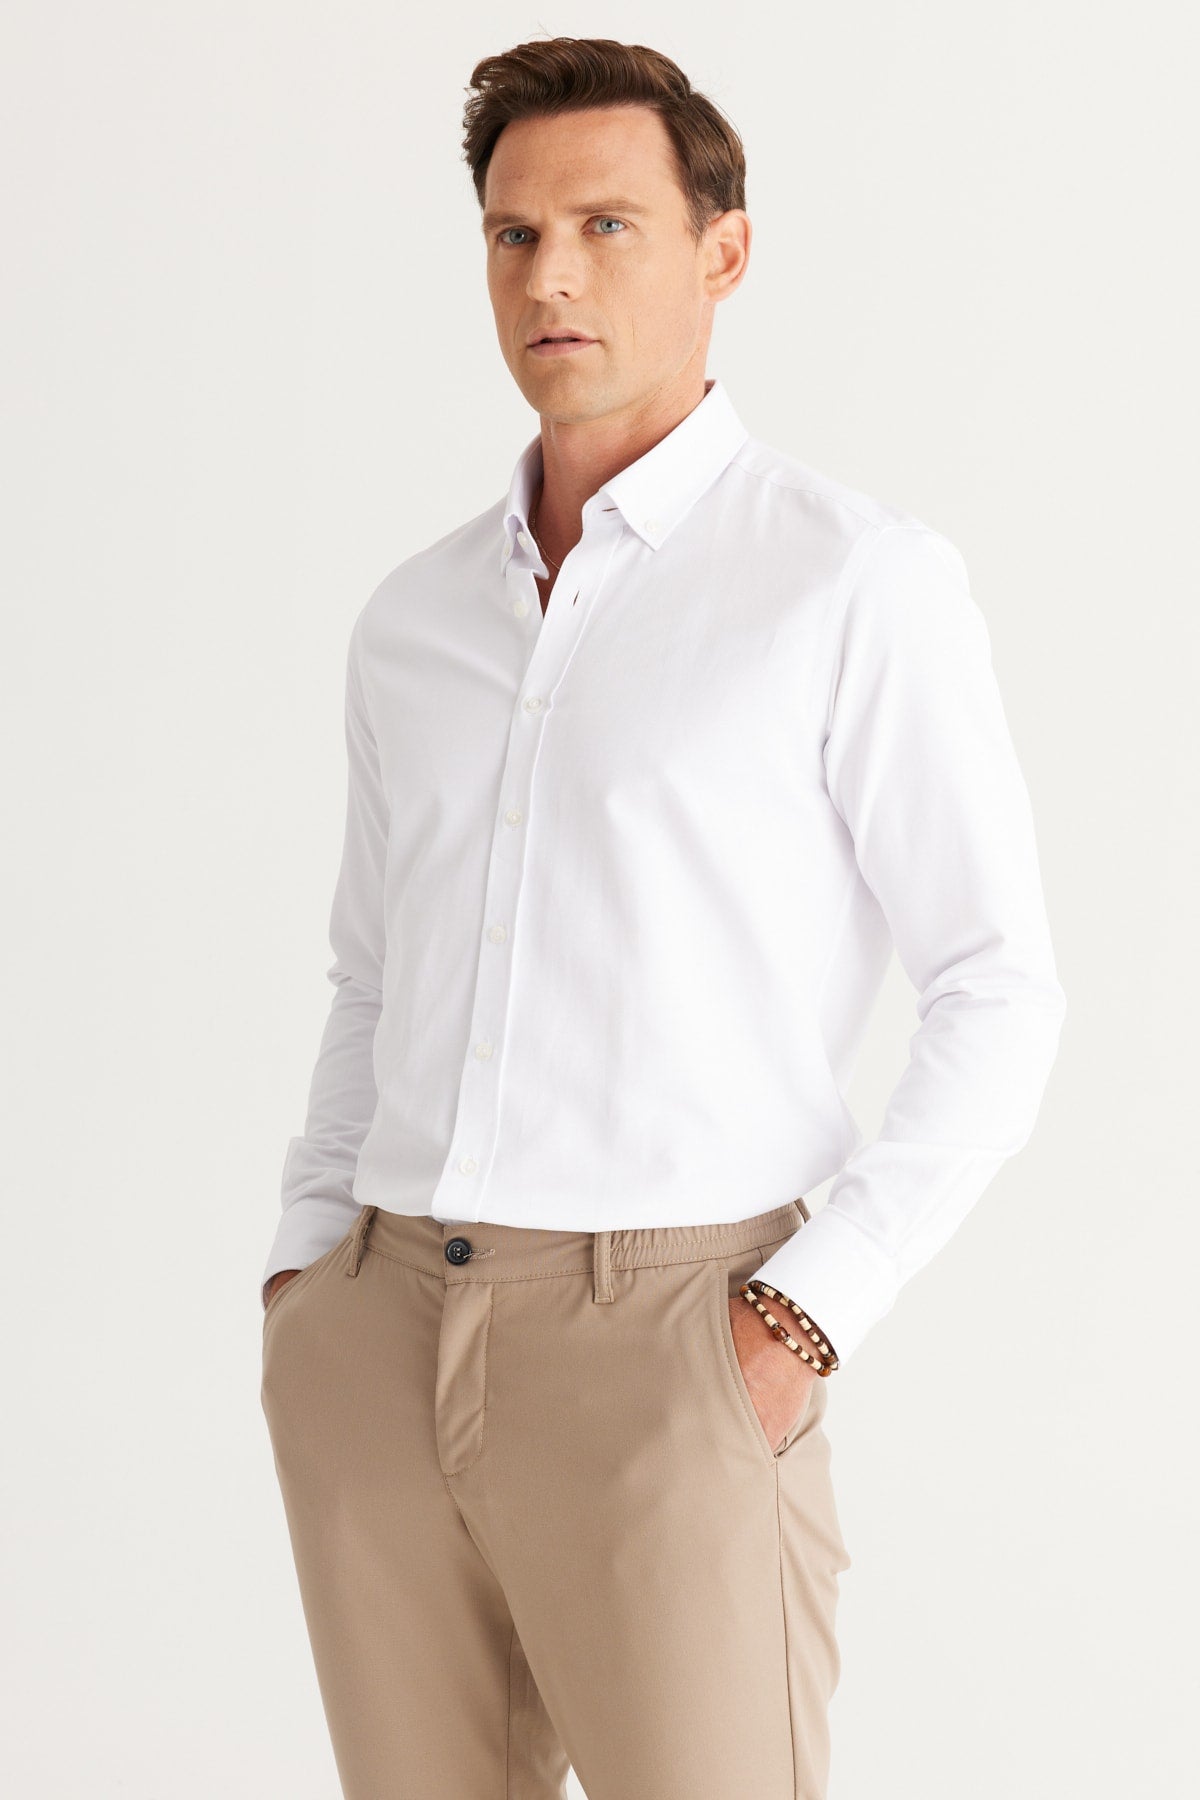 Long Sleeve Dress Shirt: A Must-Have for Office Attire